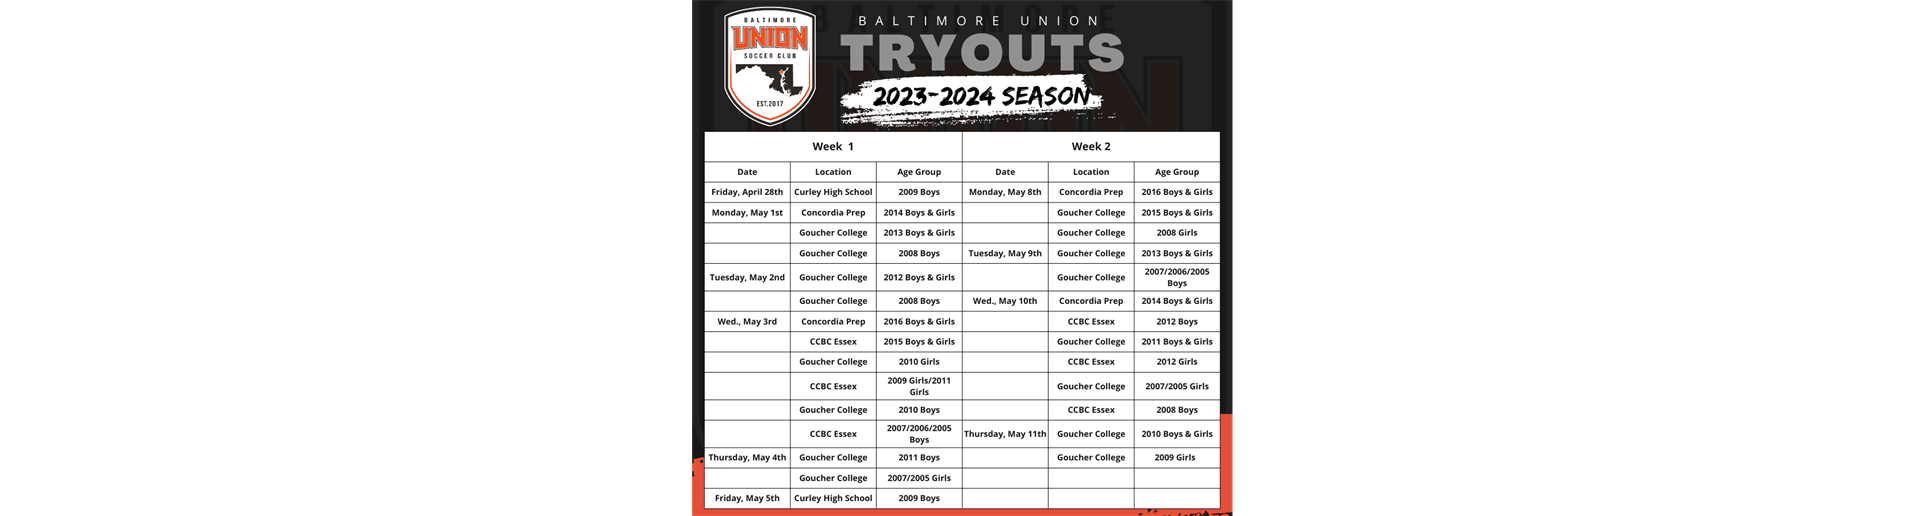 Tryouts for the 2023-2024 Season